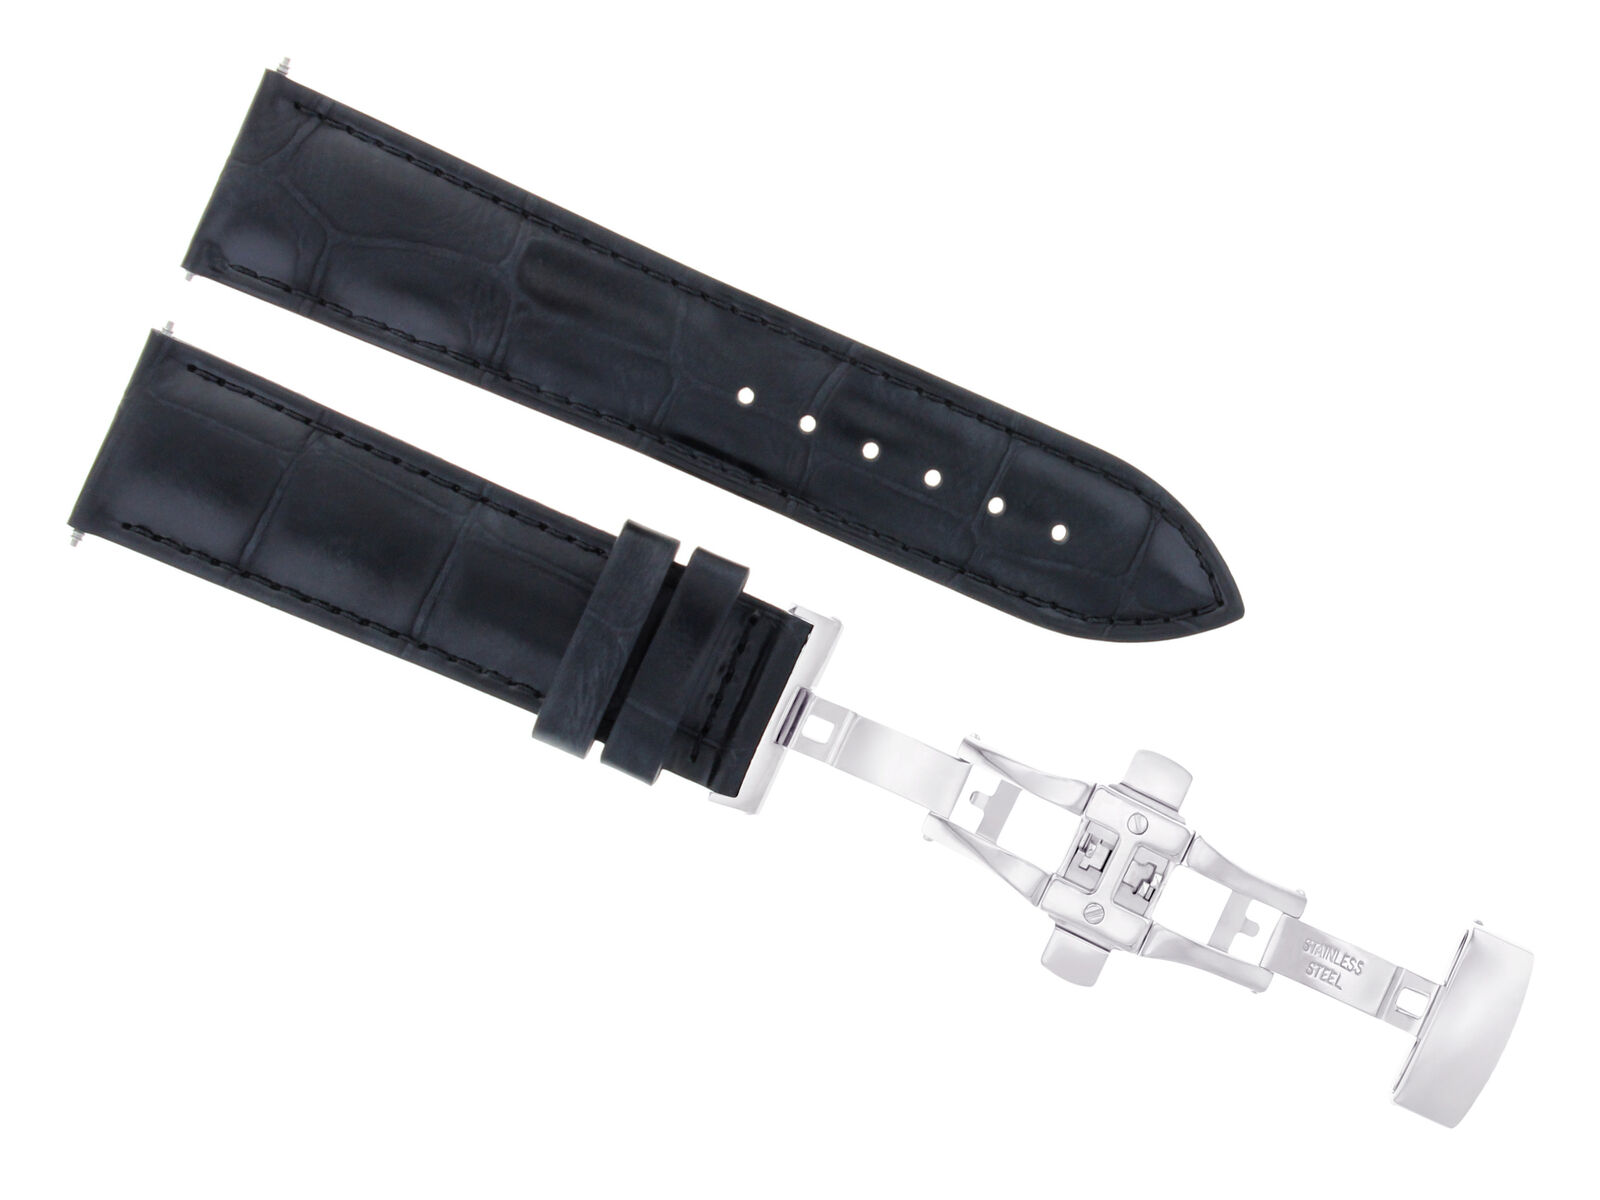 20MM/16MM LEATHER WATCH BAND STRAP DEPLOYMENT CLASP BUCKLE FOR BREGUET BLACK